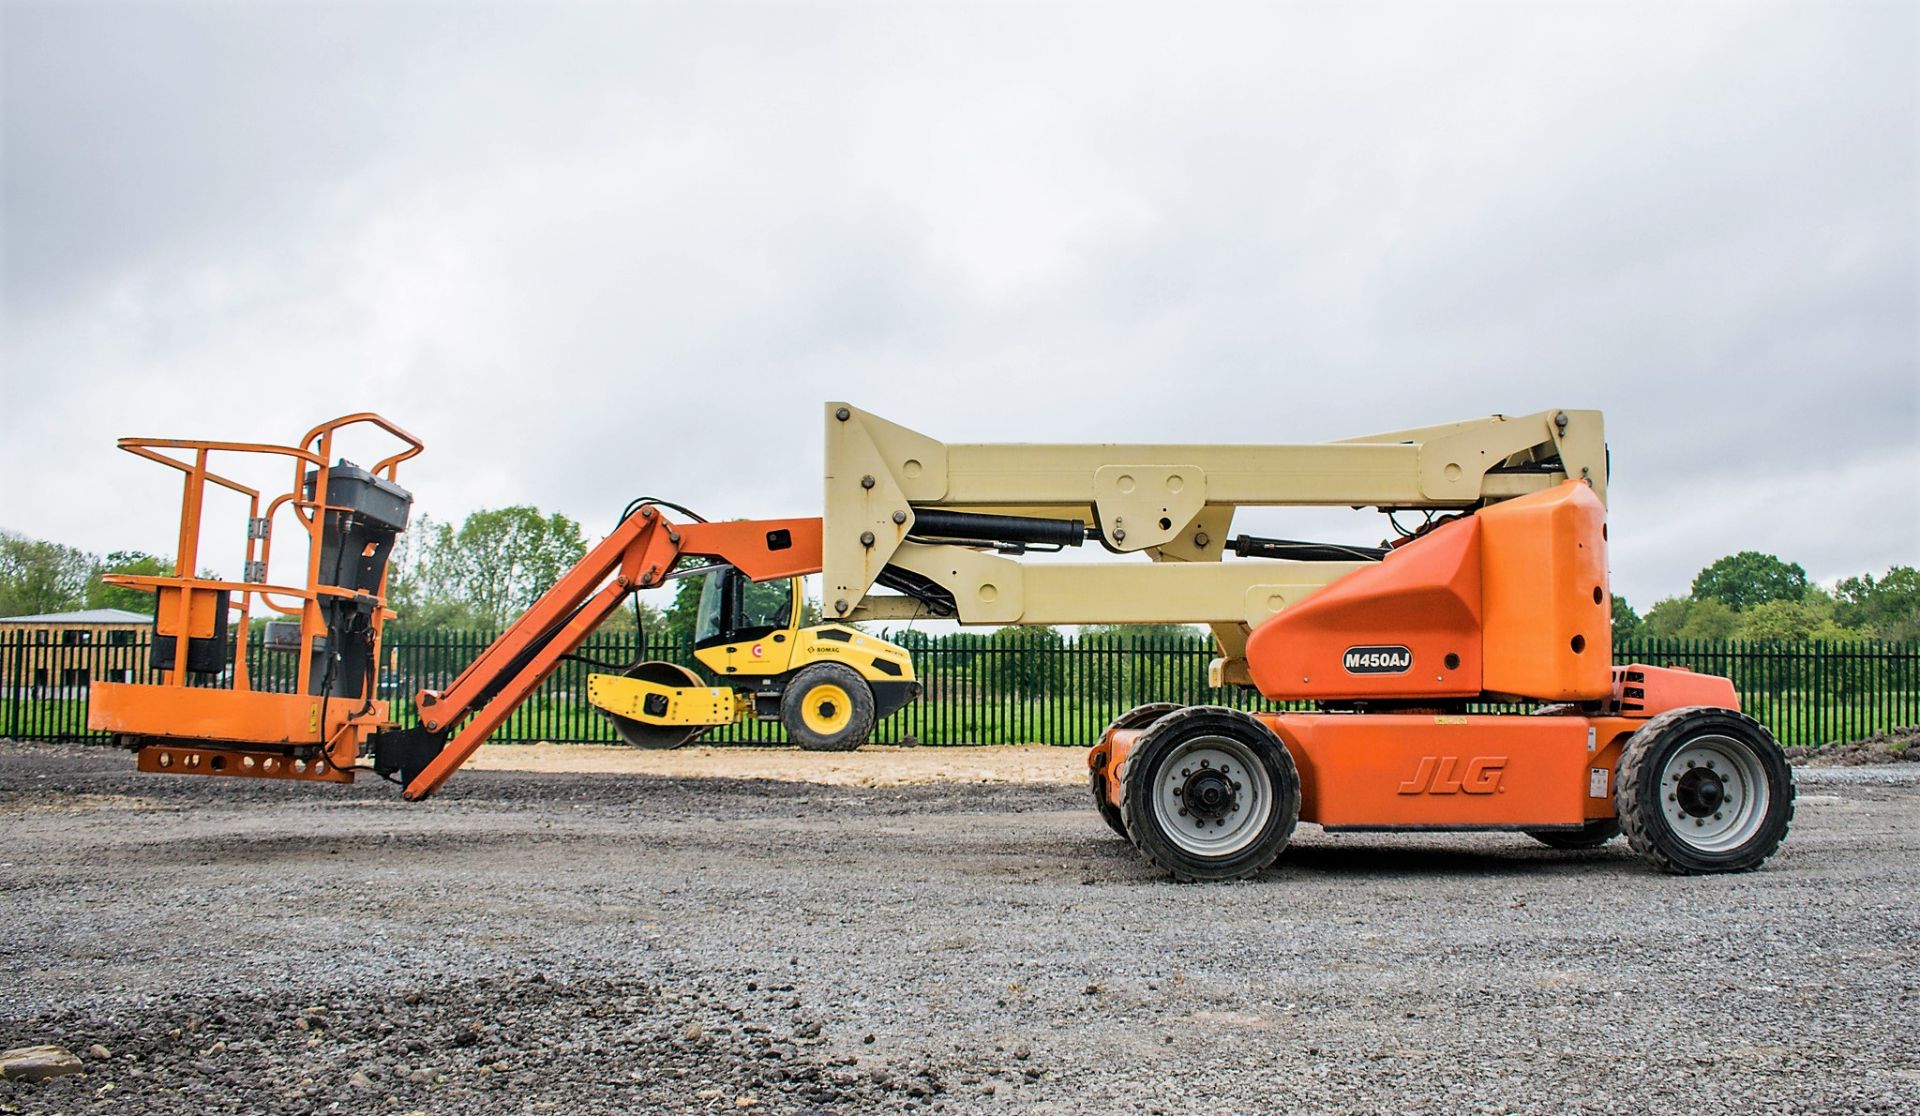 JLG M450AJ battery electric/diesel 4WD articulated boom lift access platforms  Year: 2007 S/N: 22639 - Image 8 of 17